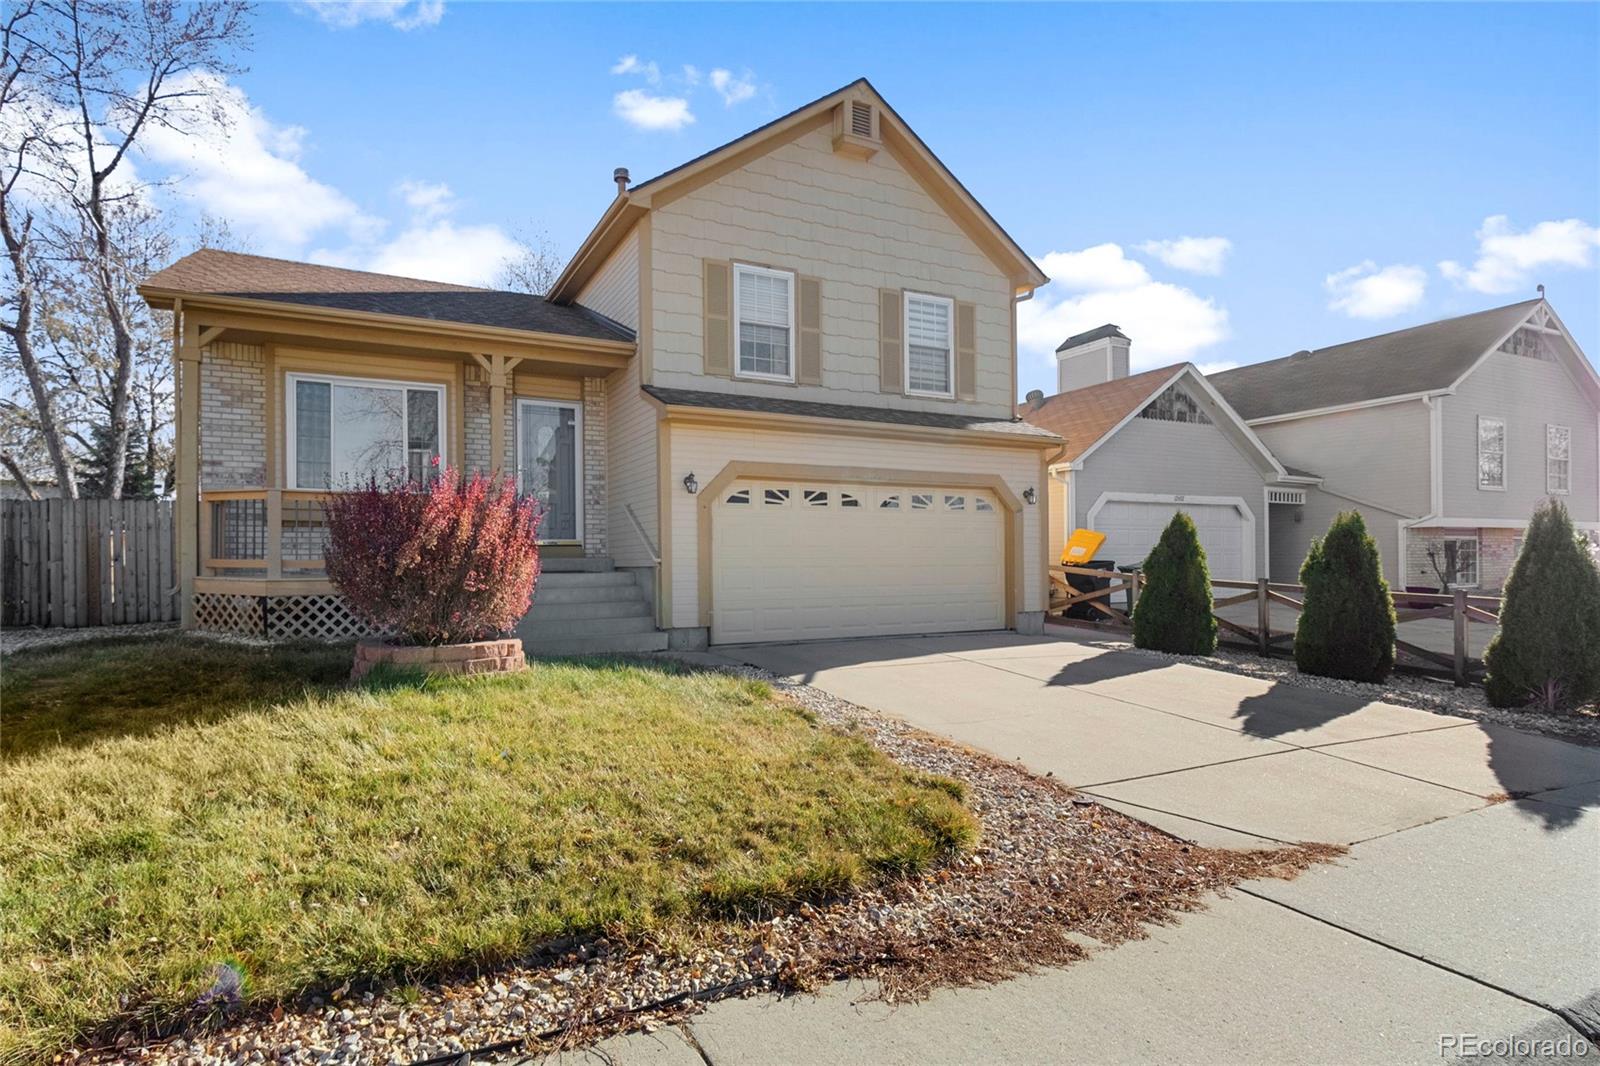 Report Image for 12634  James Court,Broomfield, Colorado